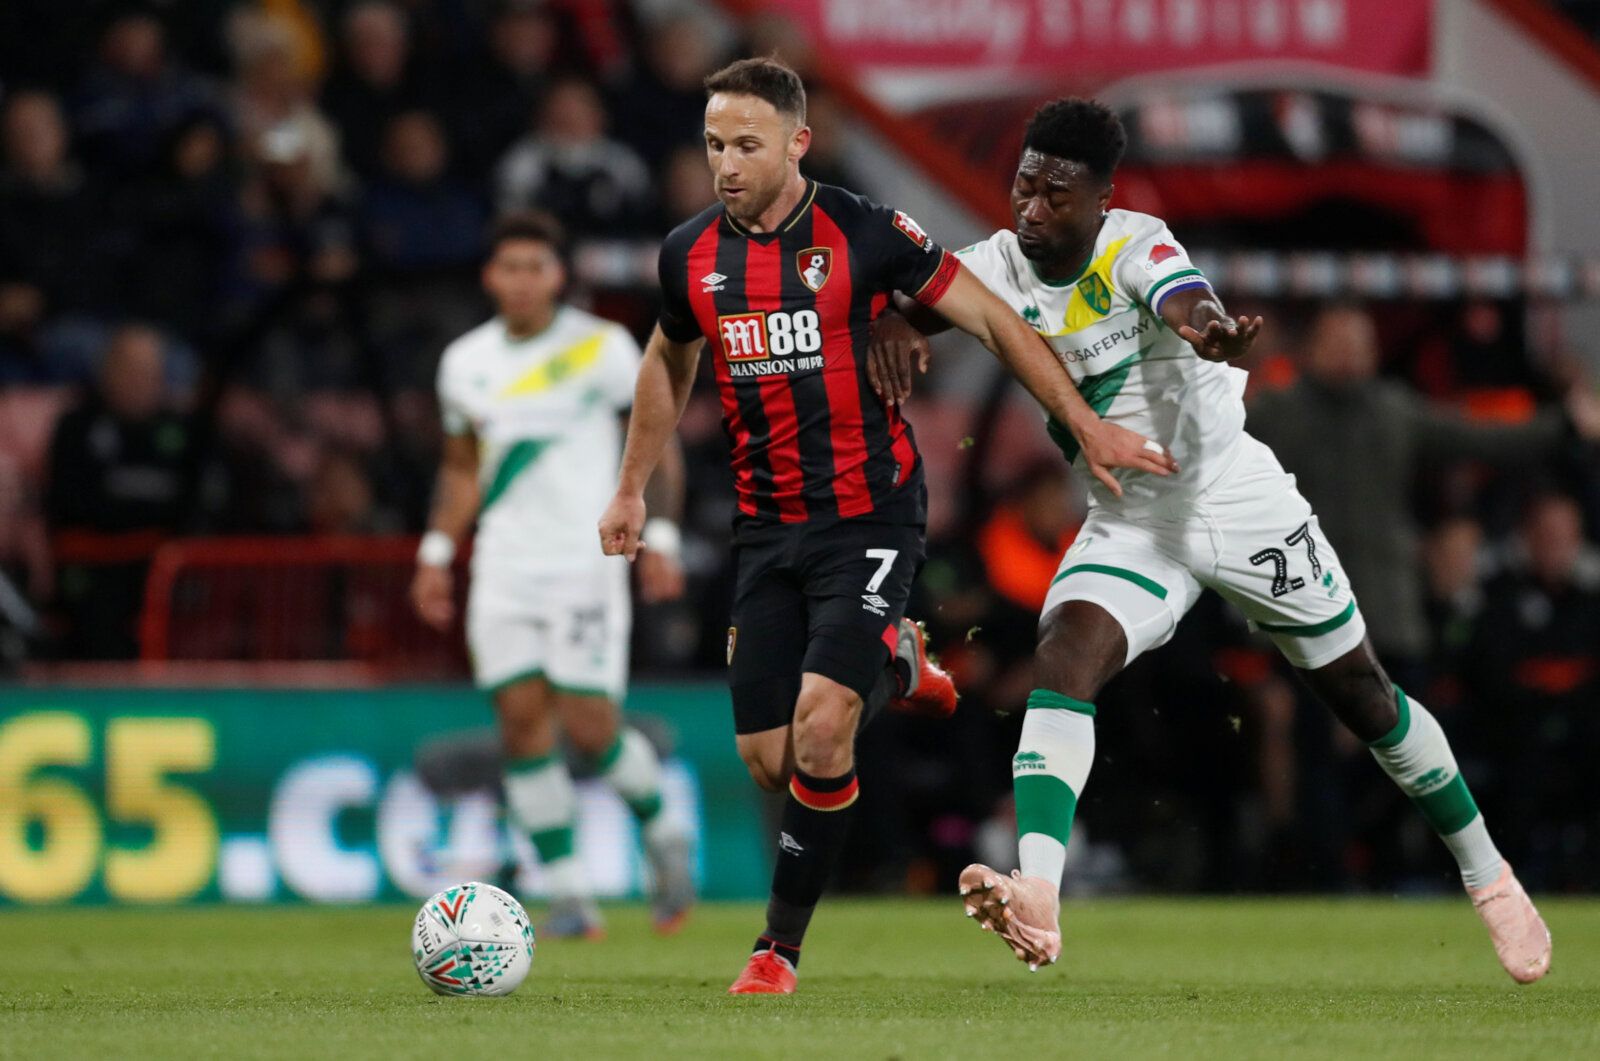 Soccer Football - Carabao Cup Fourth Round - AFC Bournemouth v Norwich City - Vitality Stadium, Bournemouth, Britain - October 30, 2018  Bournemouth's Marc Pugh in action with Norwich City's Alexander Tettey    Action Images via Reuters/Matthew Childs  EDITORIAL USE ONLY. No use with unauthorized audio, video, data, fixture lists, club/league logos or 